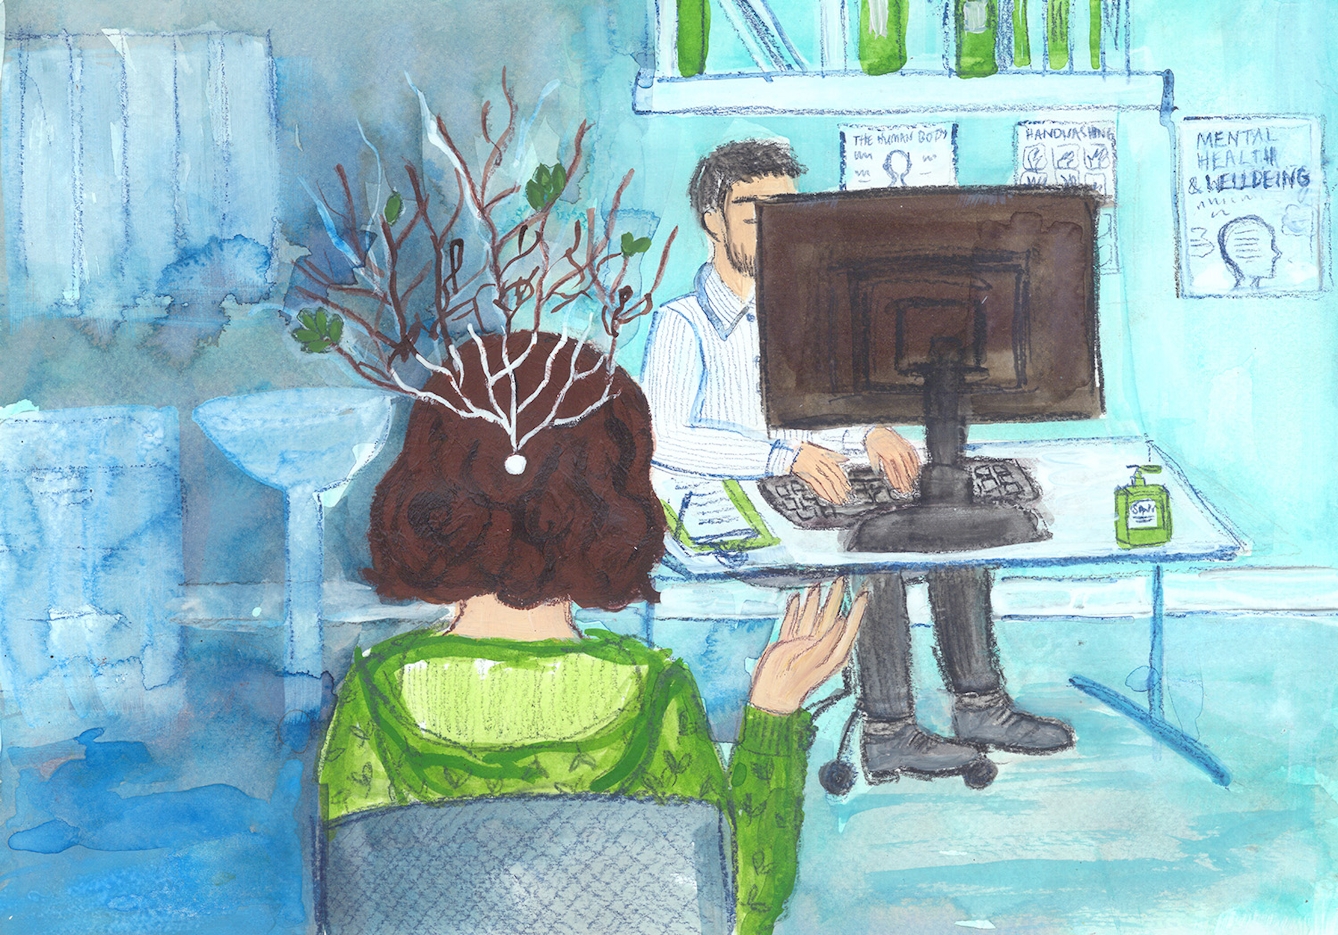 Photograph of a watercolour painting. Shown is the back of a girl with short brown curly hair sitting down in a doctor's office facing a male doctor. A white circle, representing the contraceptive pill, is shown in the centre of her head. A white branching line is coming out of the pill, with the branches extending out of the girl's head. There are a few leaves on several of the branches, although the majority are bare. The girls right arm is raised as if she is gesturing at the doctor. The doctor is sat behind a large desktop computer, typing, with his face slightly obscured. There is a bookshelf behind him and a poster with writing that reads 'Mental health and wellbeing' 